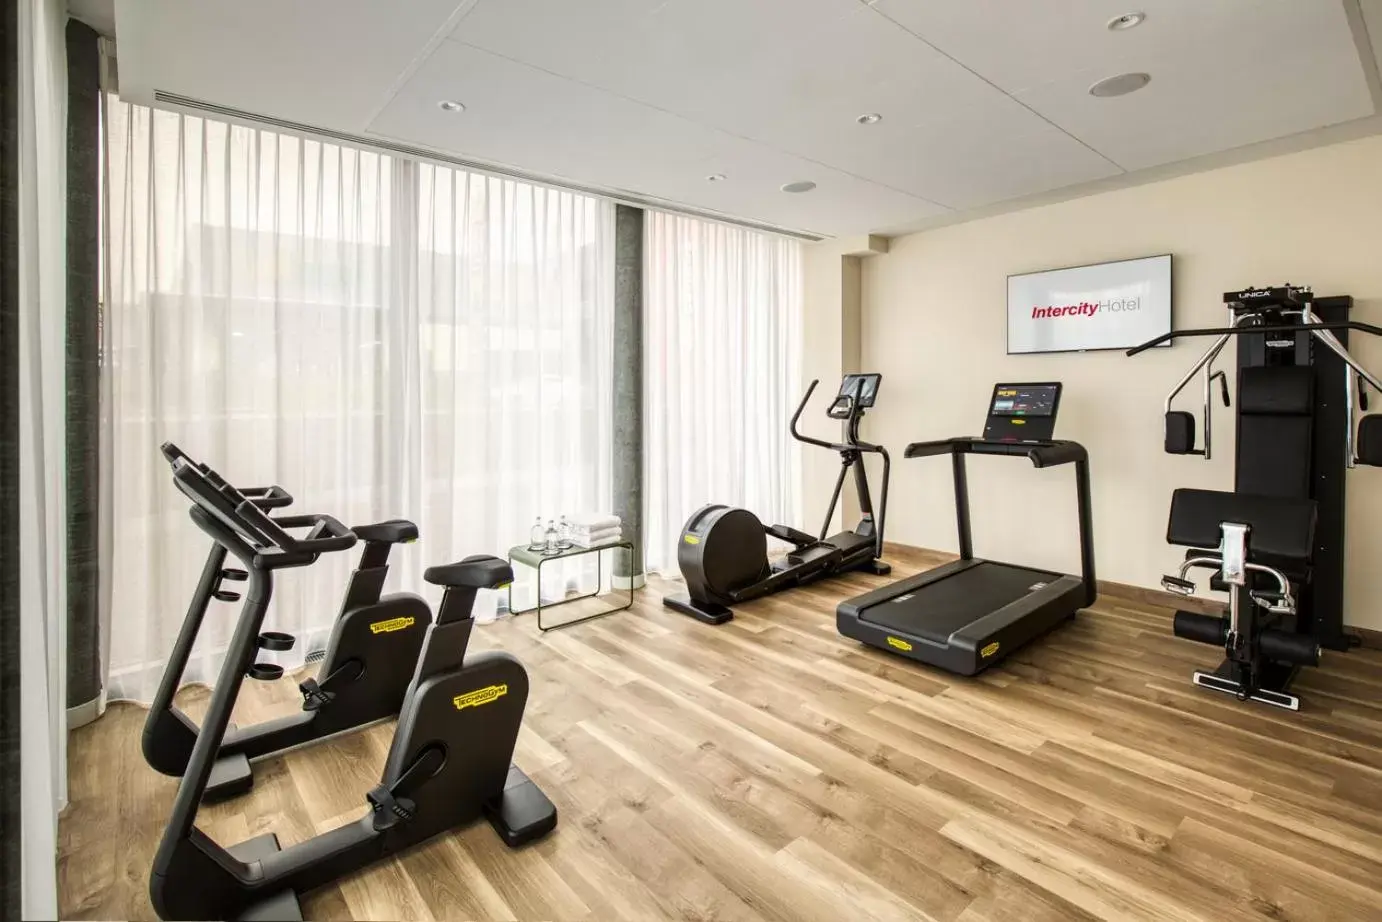 Fitness centre/facilities, Fitness Center/Facilities in IntercityHotel Zürich Airport